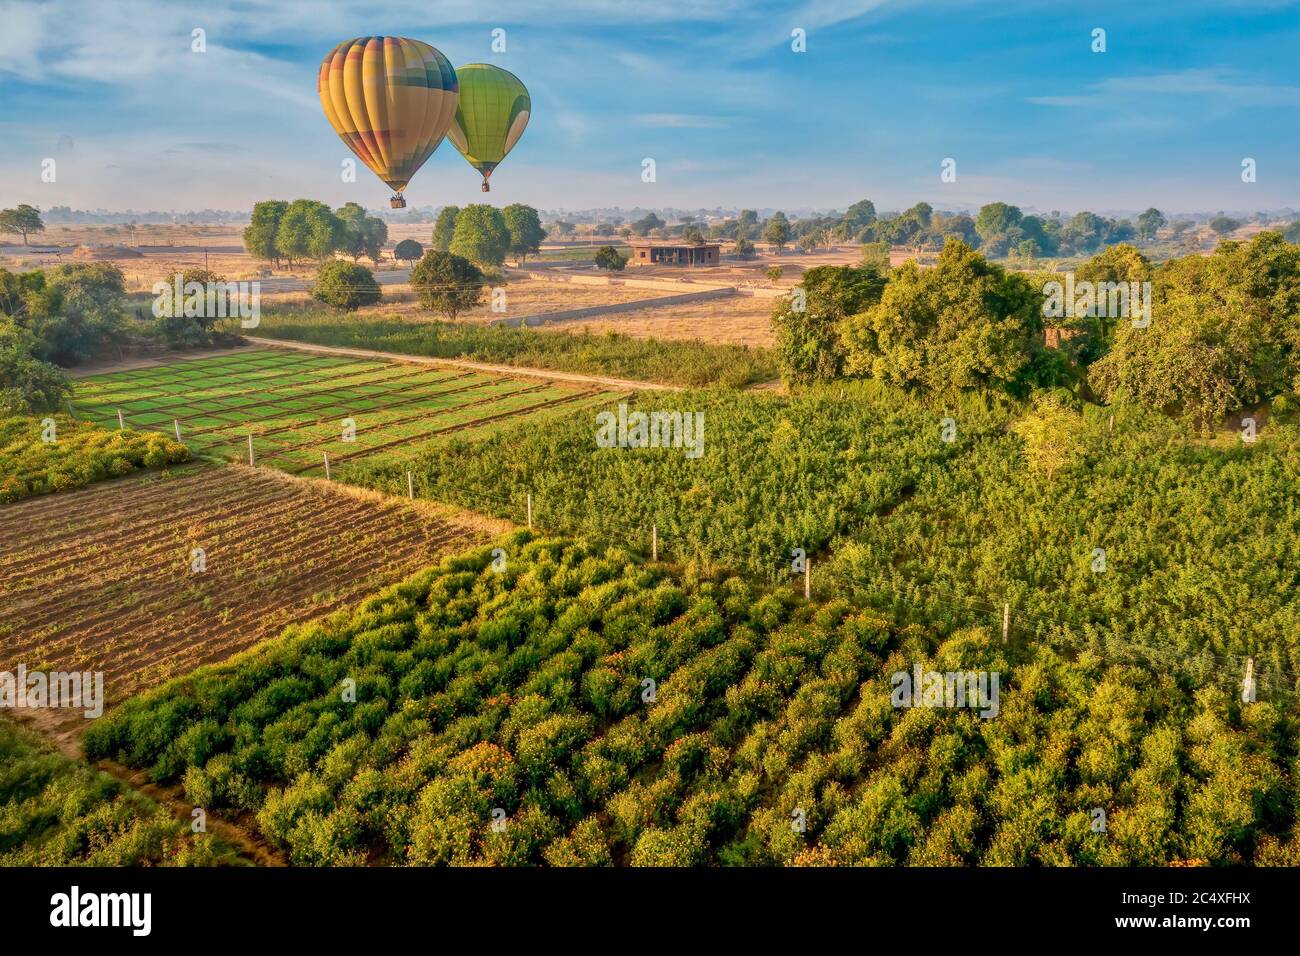 Two hot air balloons flying over marigold fields and agricultural land in a rural area near Pushkar, Rajasthan, India. Stock Photo